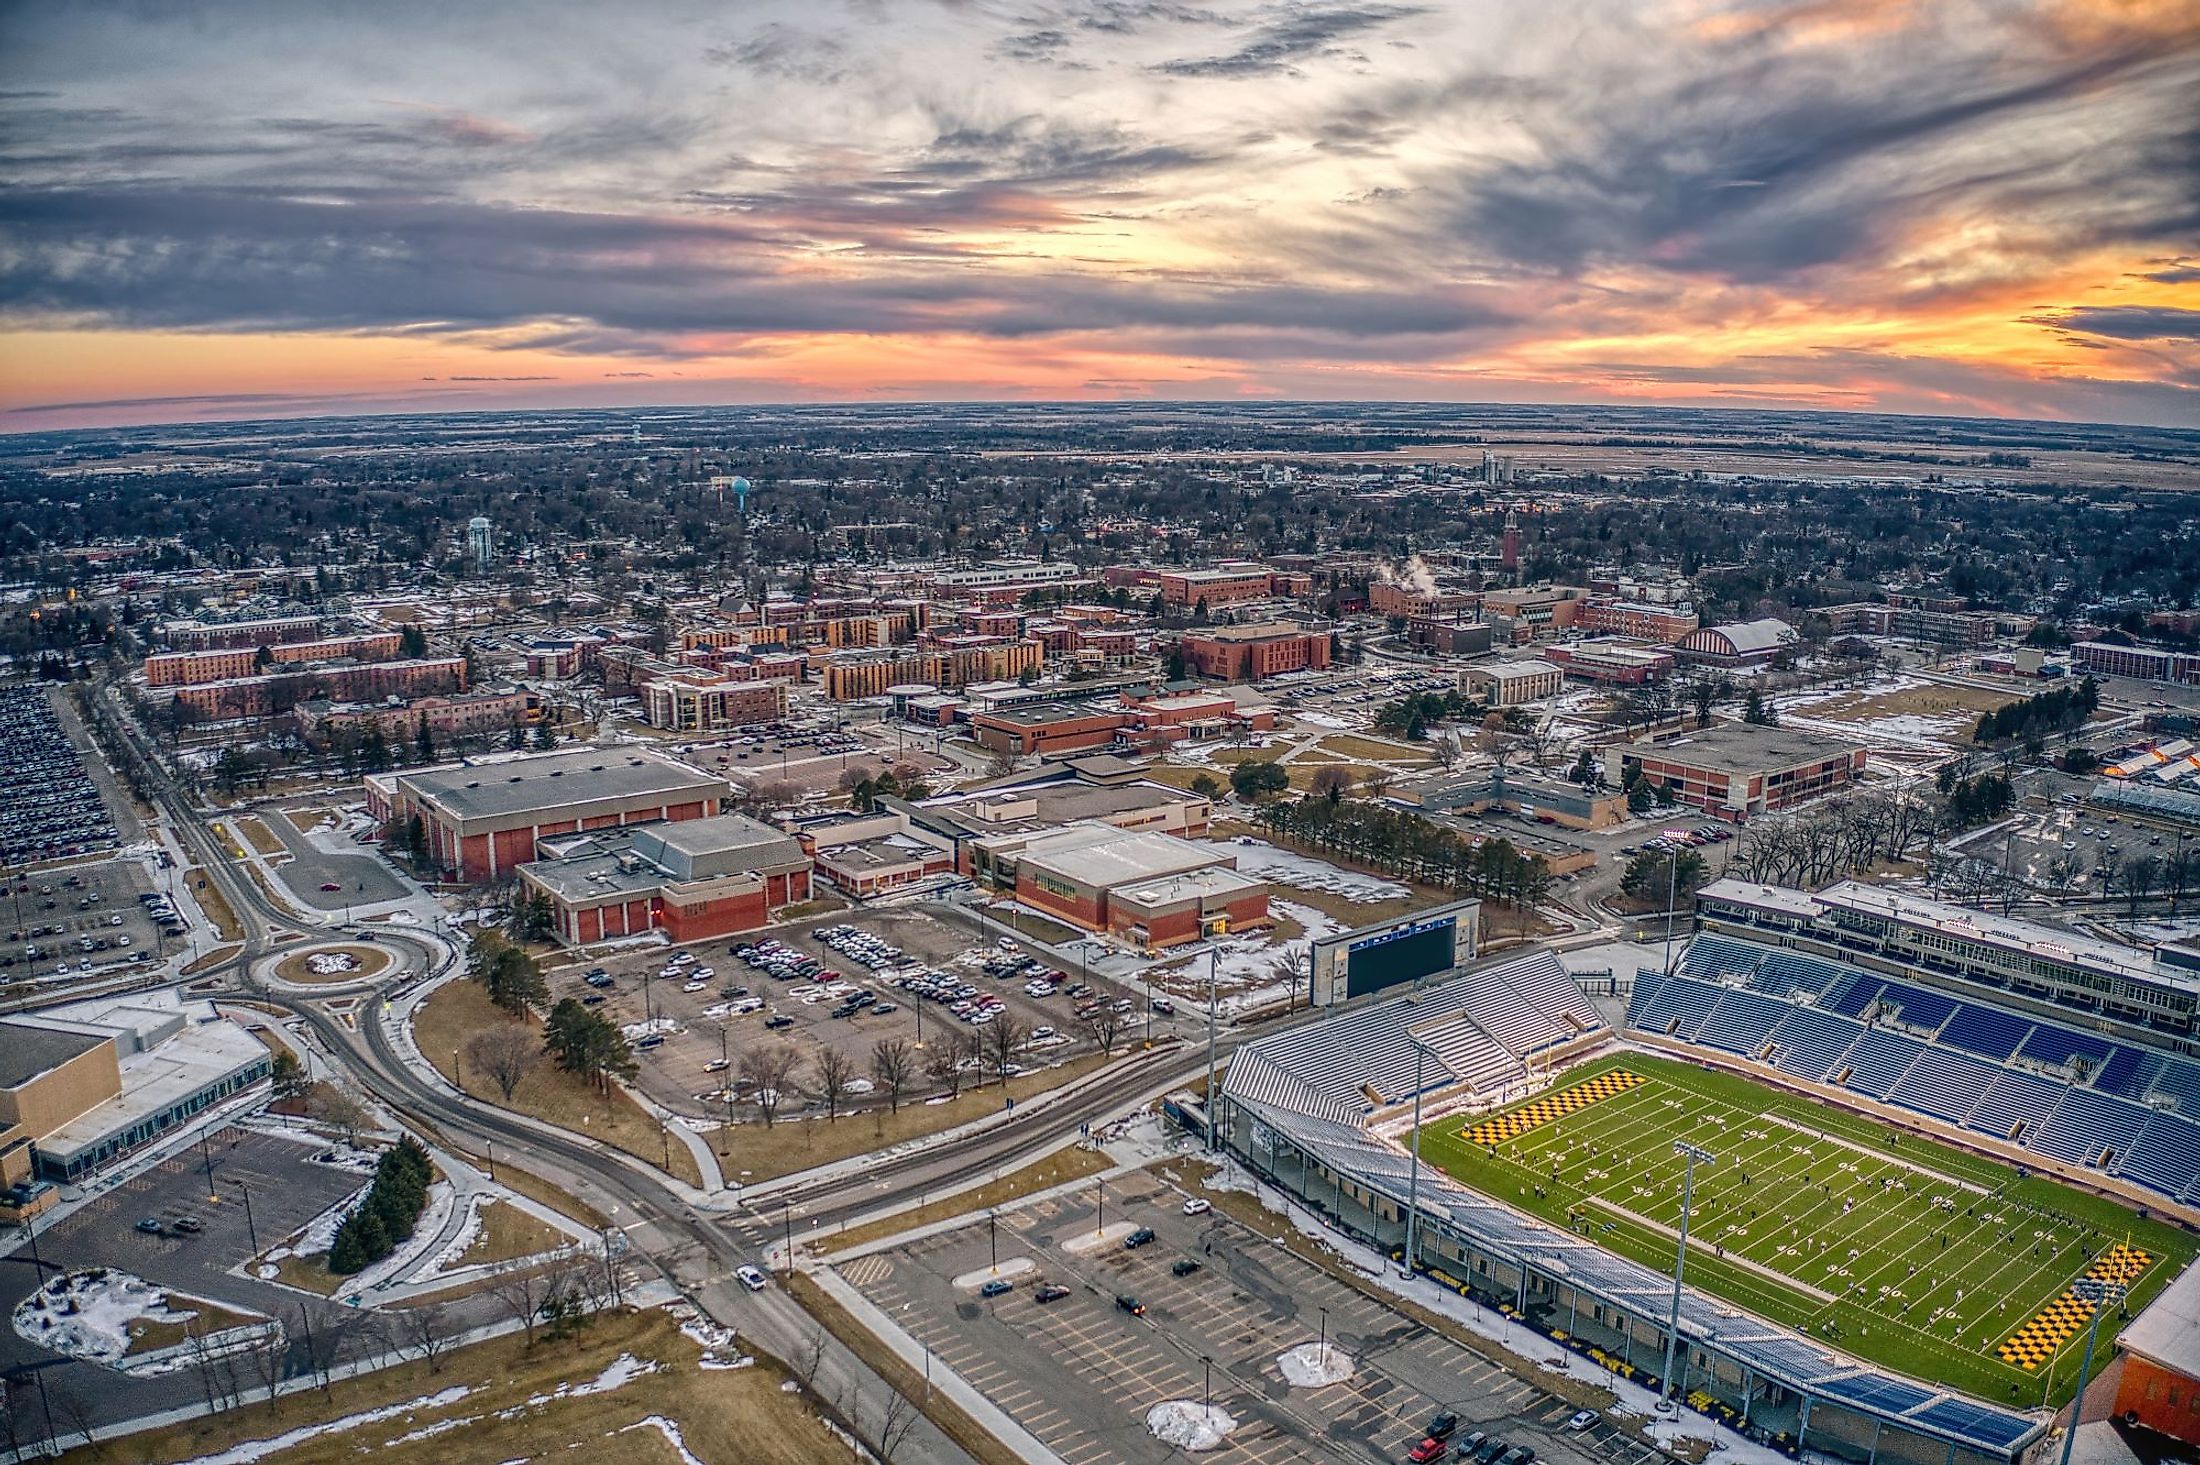 Aerial view of a large university at dusk in Brookings, South Dakota